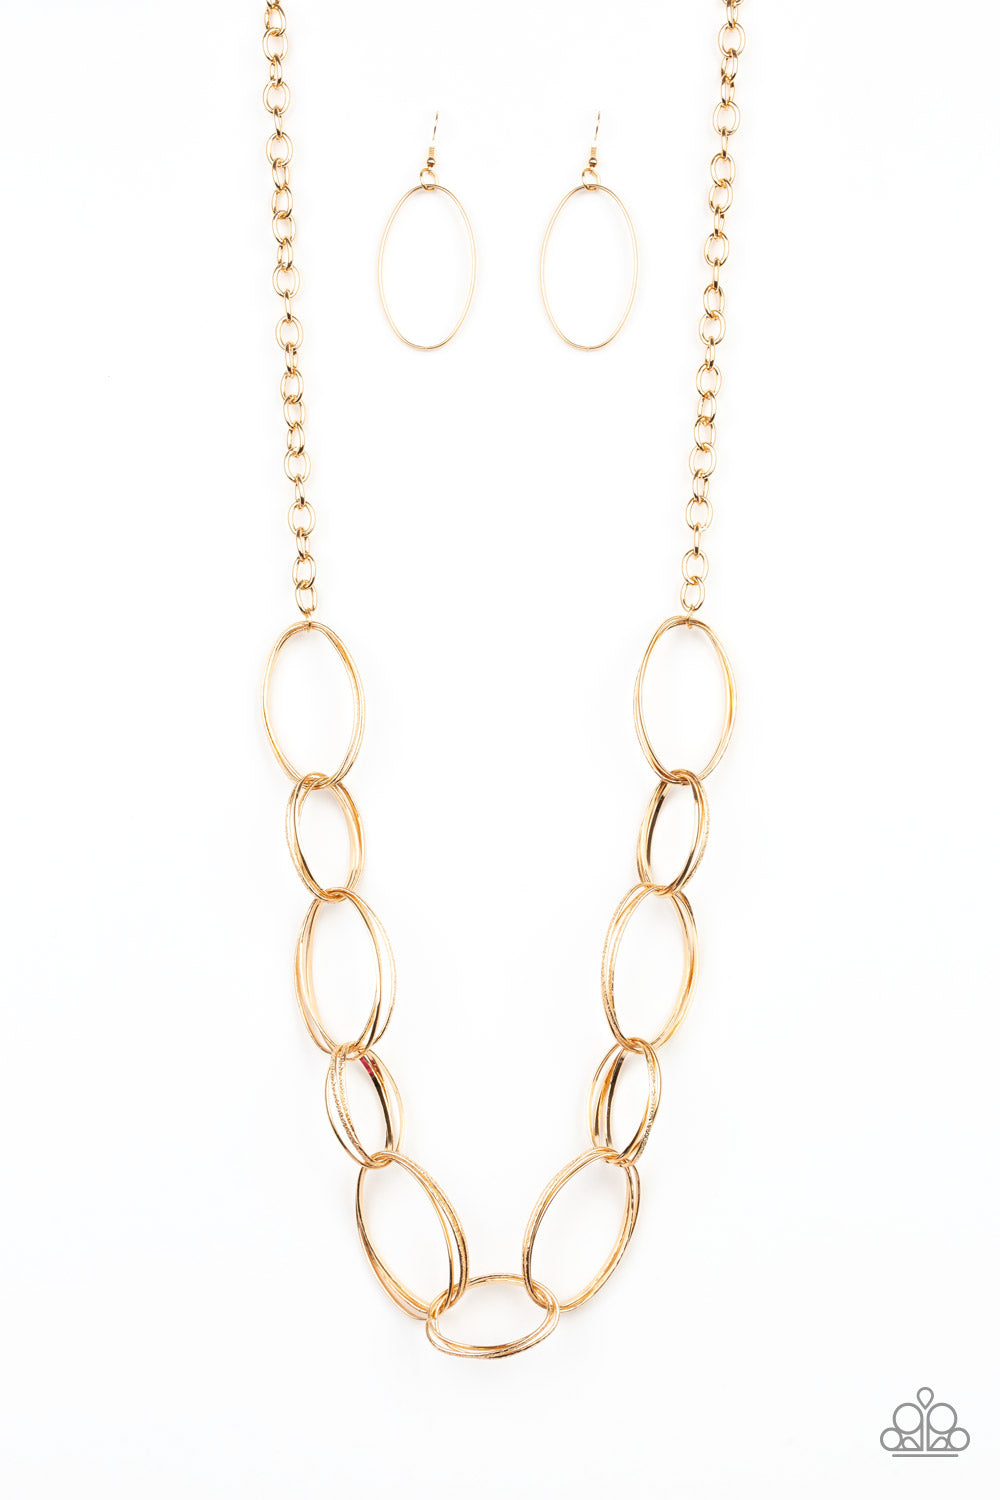 Ring Bling - Gold Necklace